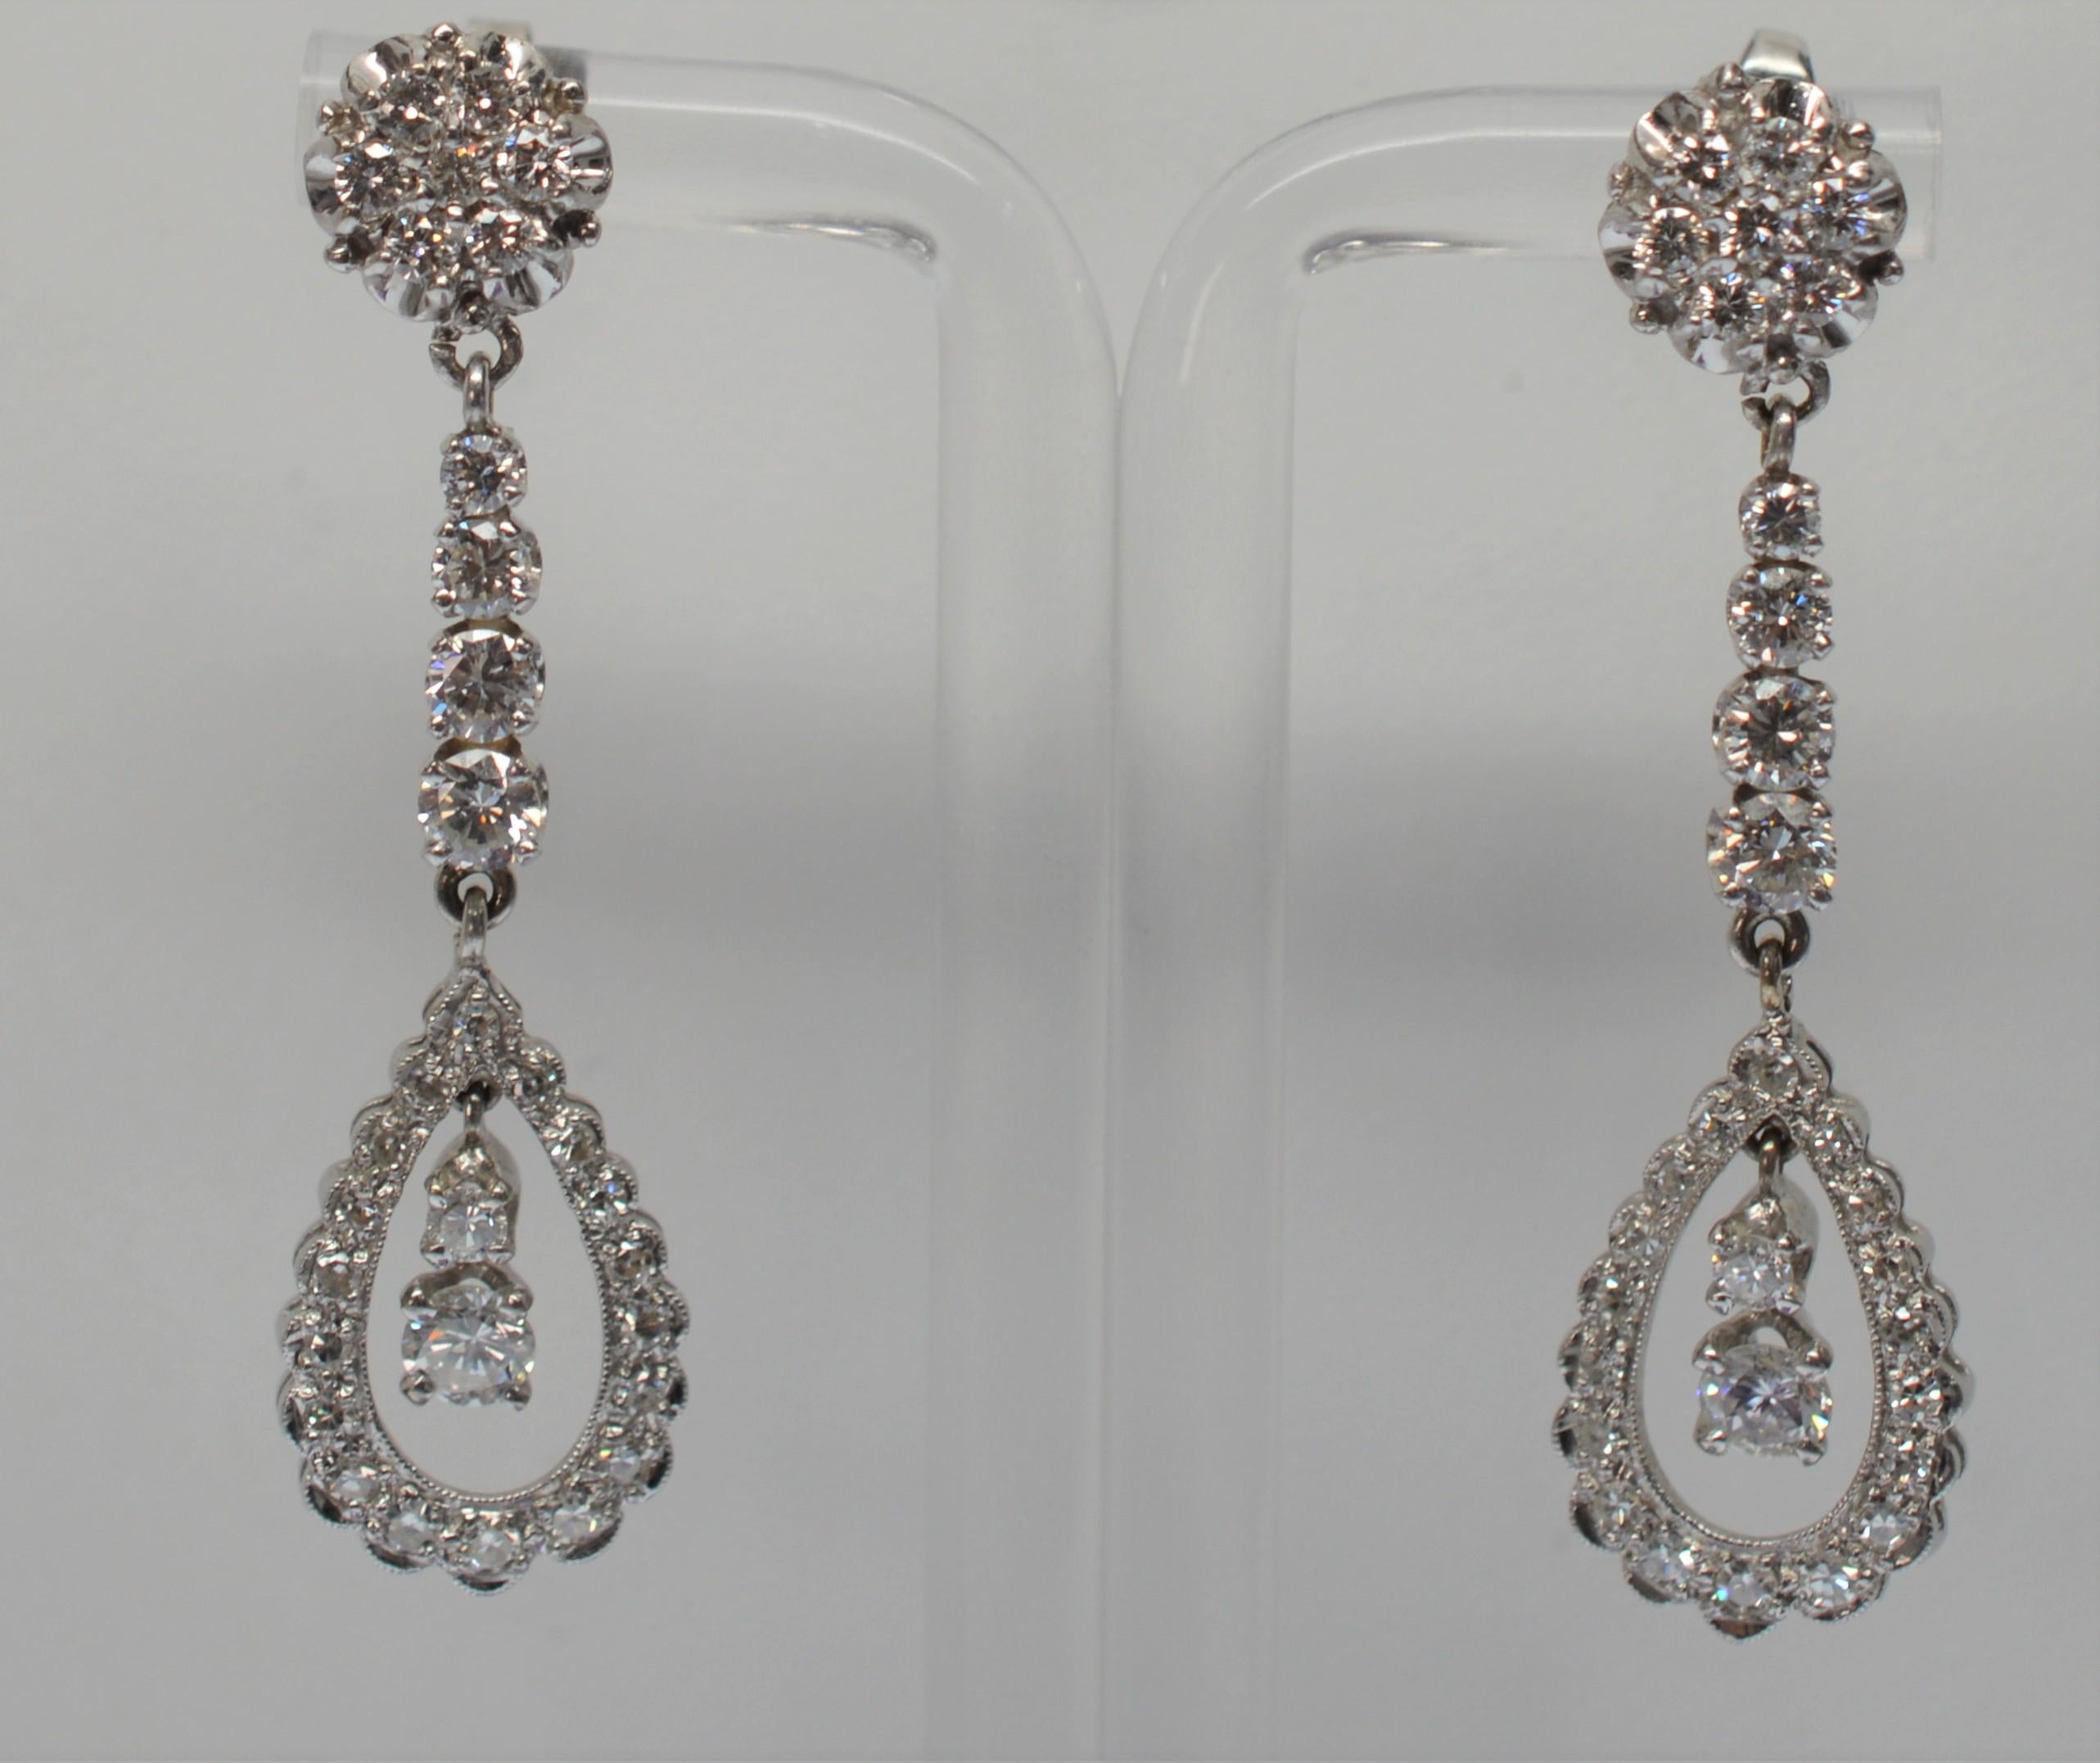 14K White Gold Fine Diamond Necklace & Earring Bridal Suite In Excellent Condition For Sale In Mount Kisco, NY